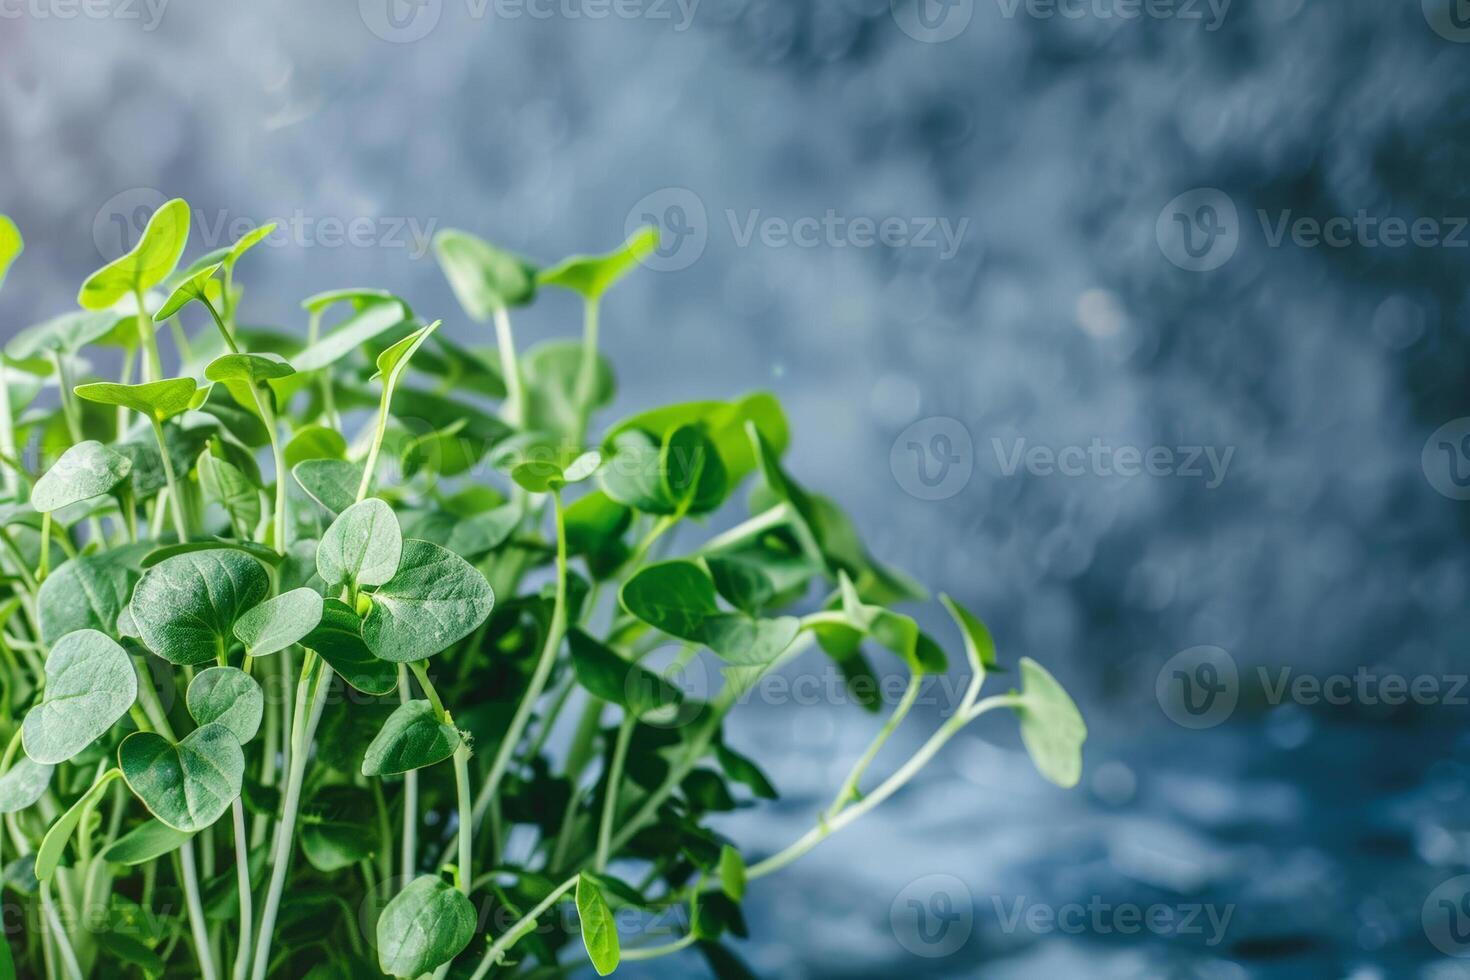 Fresh green pea sprouts against a blurred blue backdrop, symbolizing spring and growth, perfect for Earth Day promotions and healthy eating concepts photo